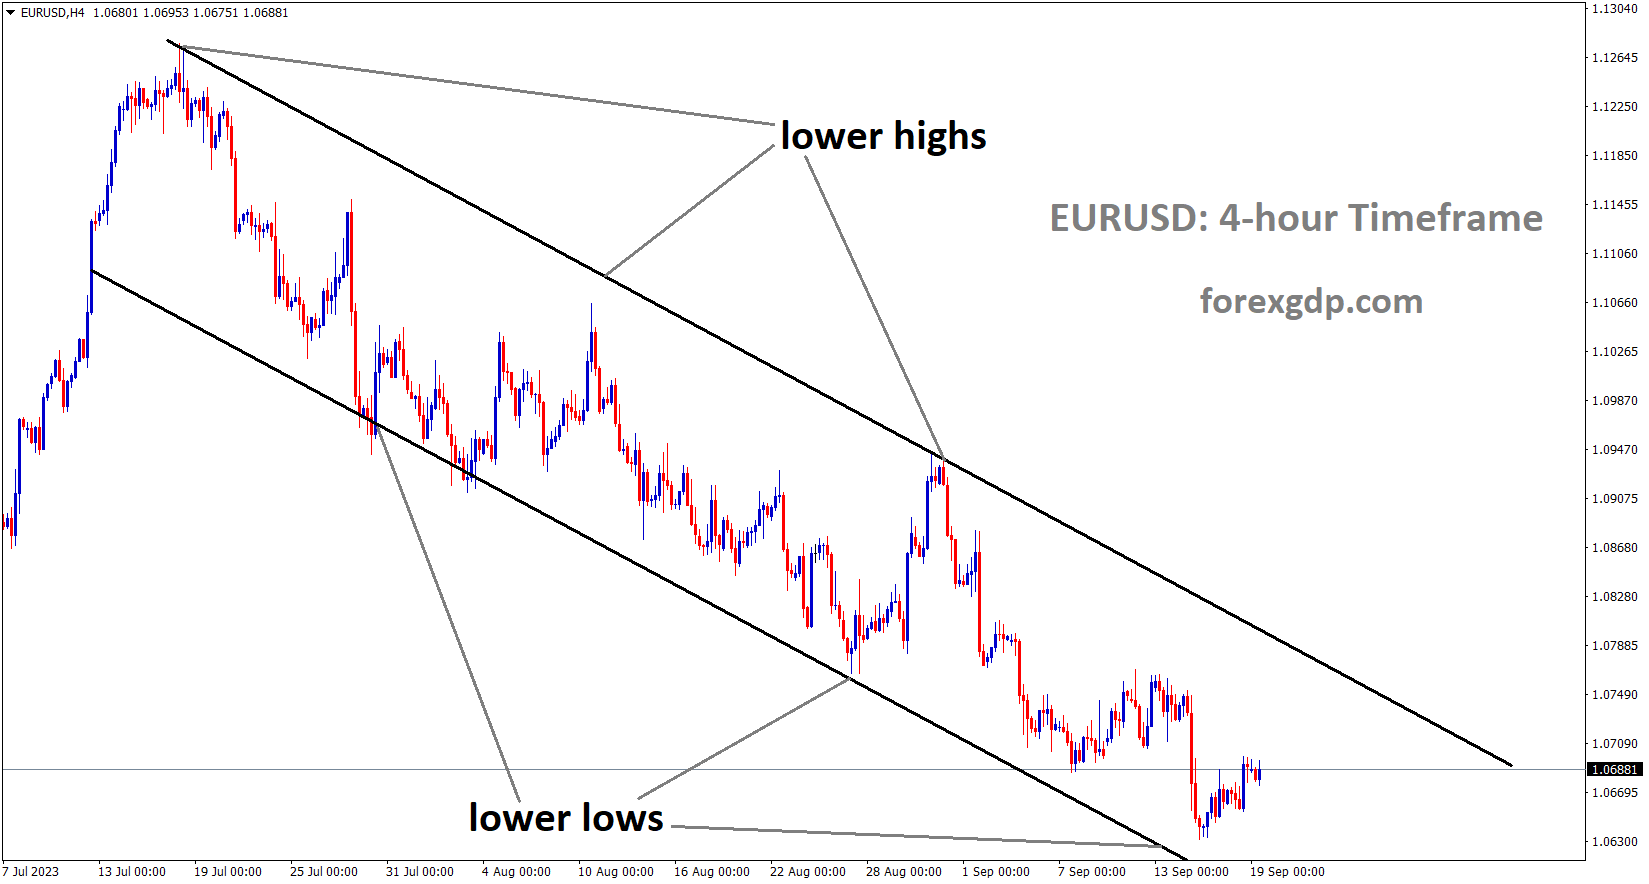 EURUSD is moving in the Descending channel and the market has rebounded from the lower low area of the channel